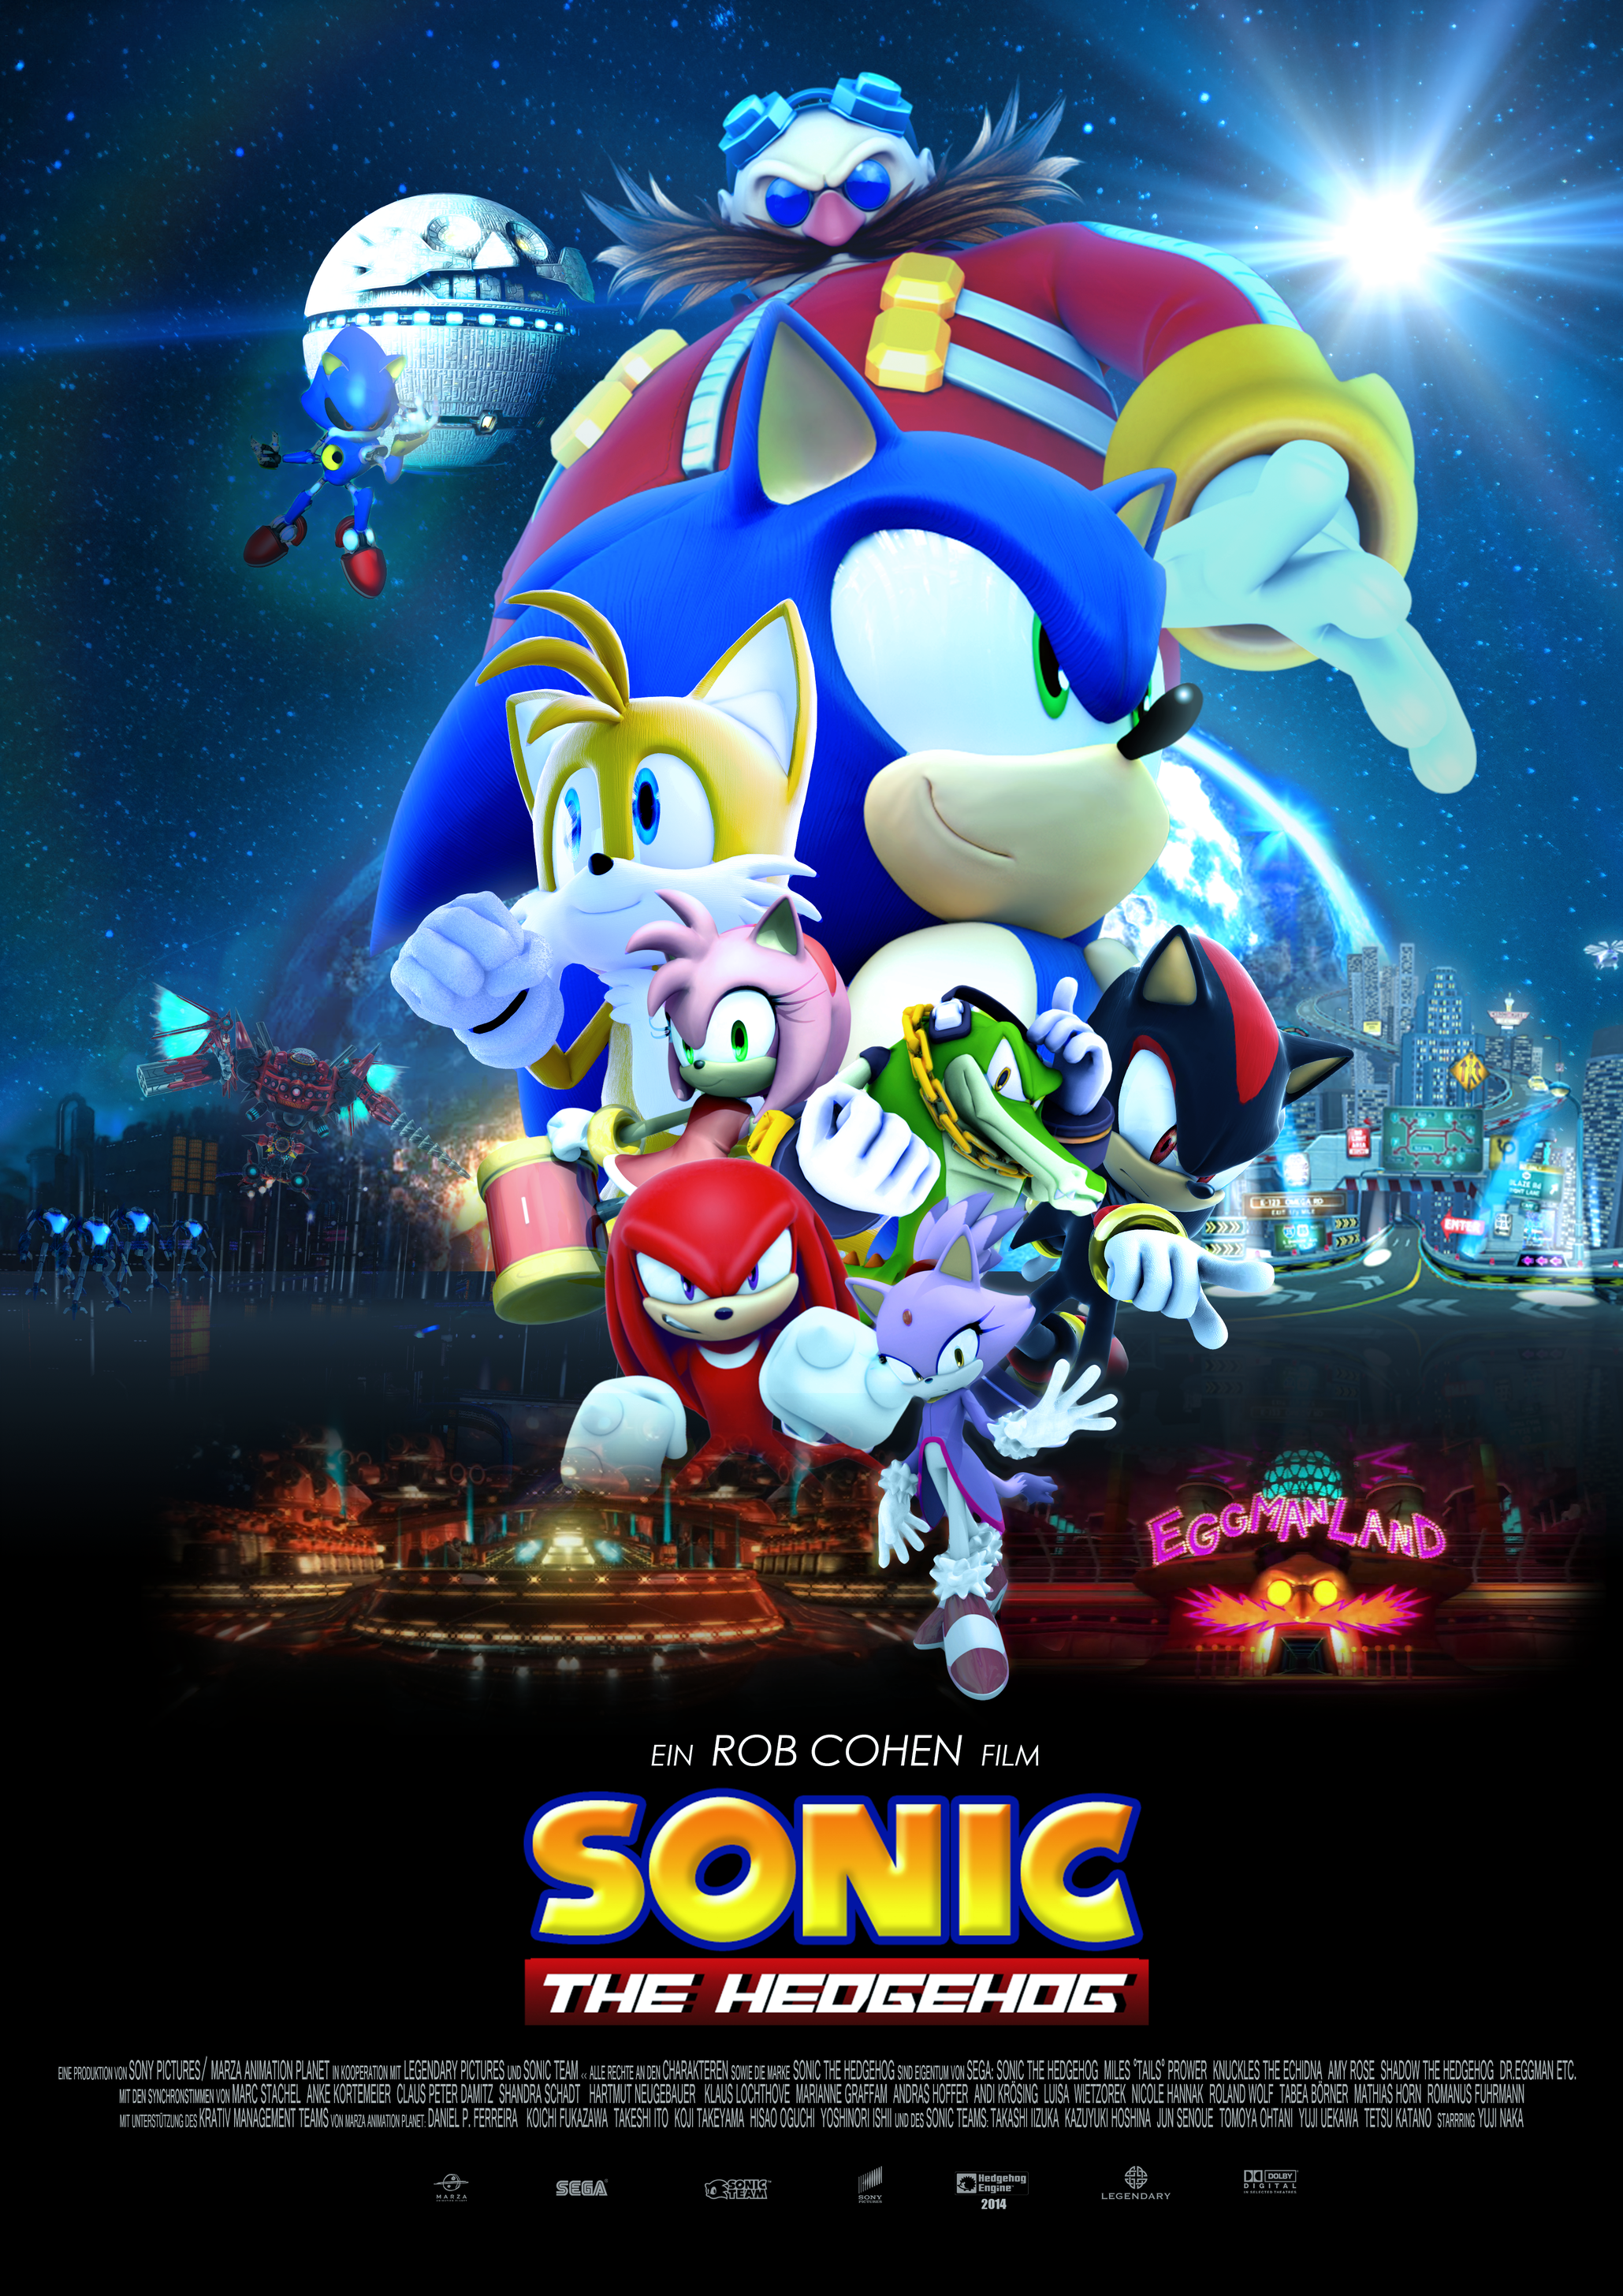 Sonic the Hedgehog Movie - Poster by RealSonicSpeed on DeviantArt2059 x 2912